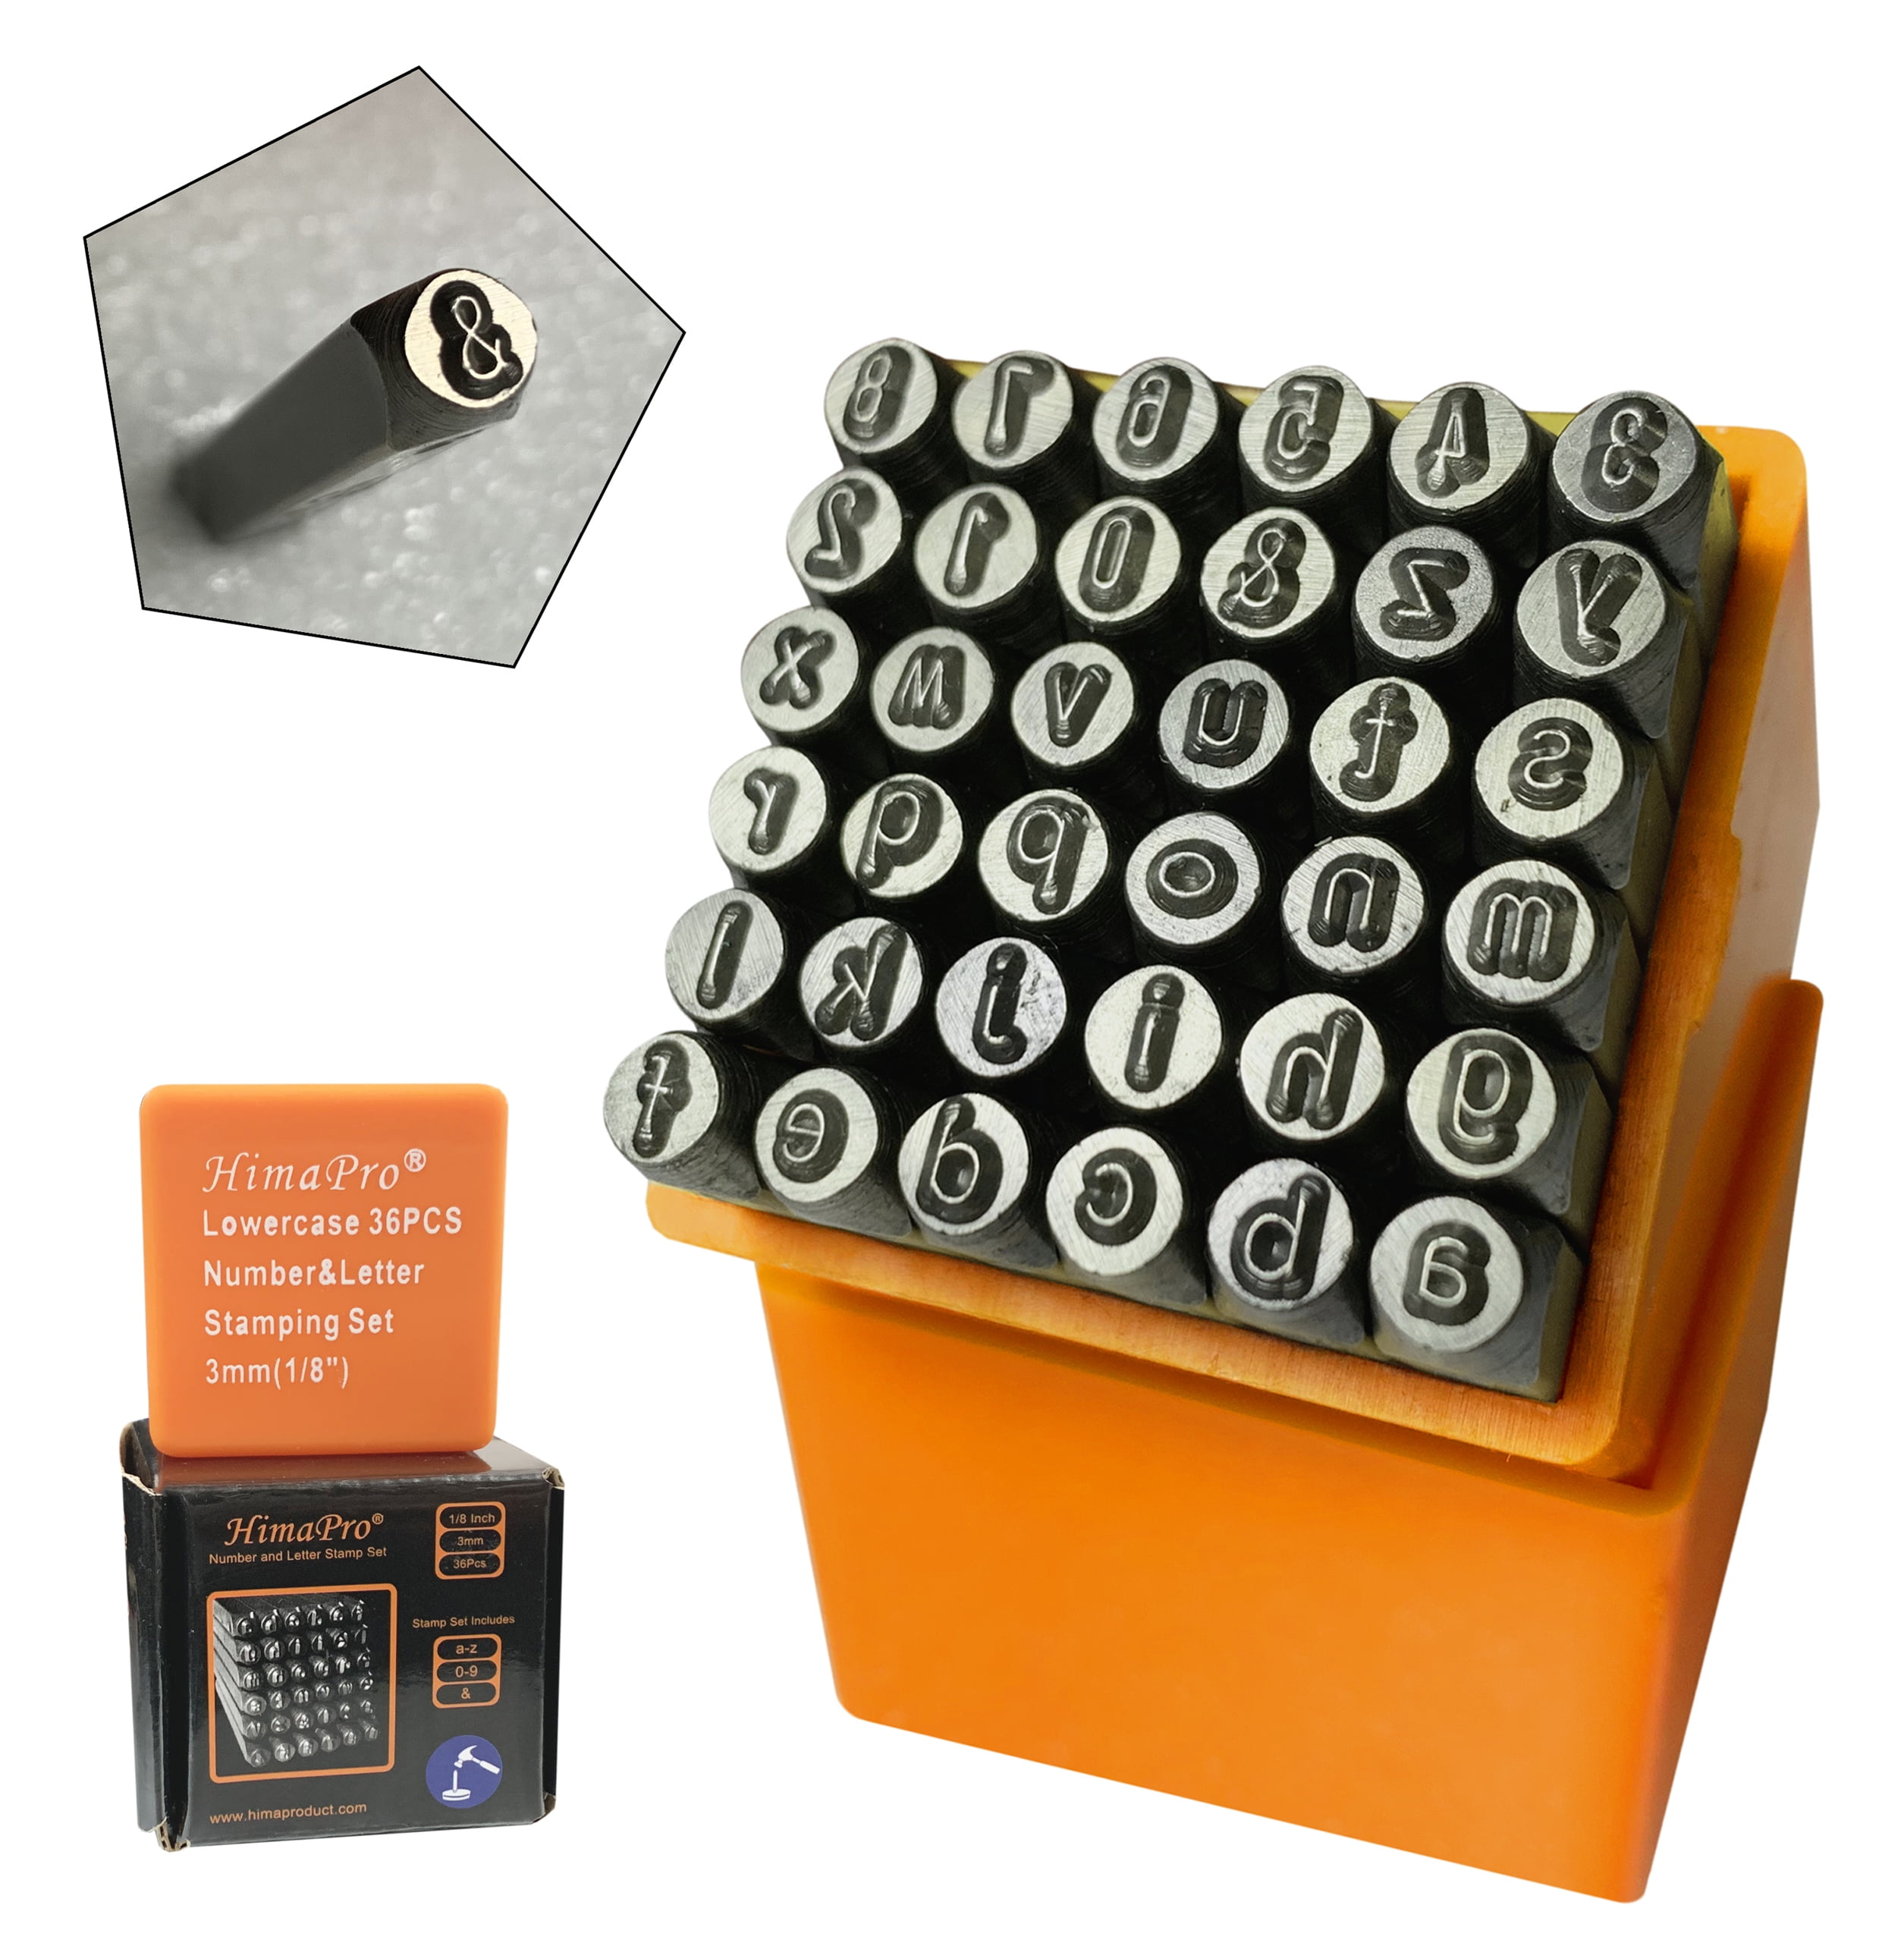 HimaPro Number and Letter Stamp Set 36 Pcs Lowercase Industrial Grade Letters 'a'-'z', &', 0'-'9' in A Plastic Box(4mm - 5/32 inch)